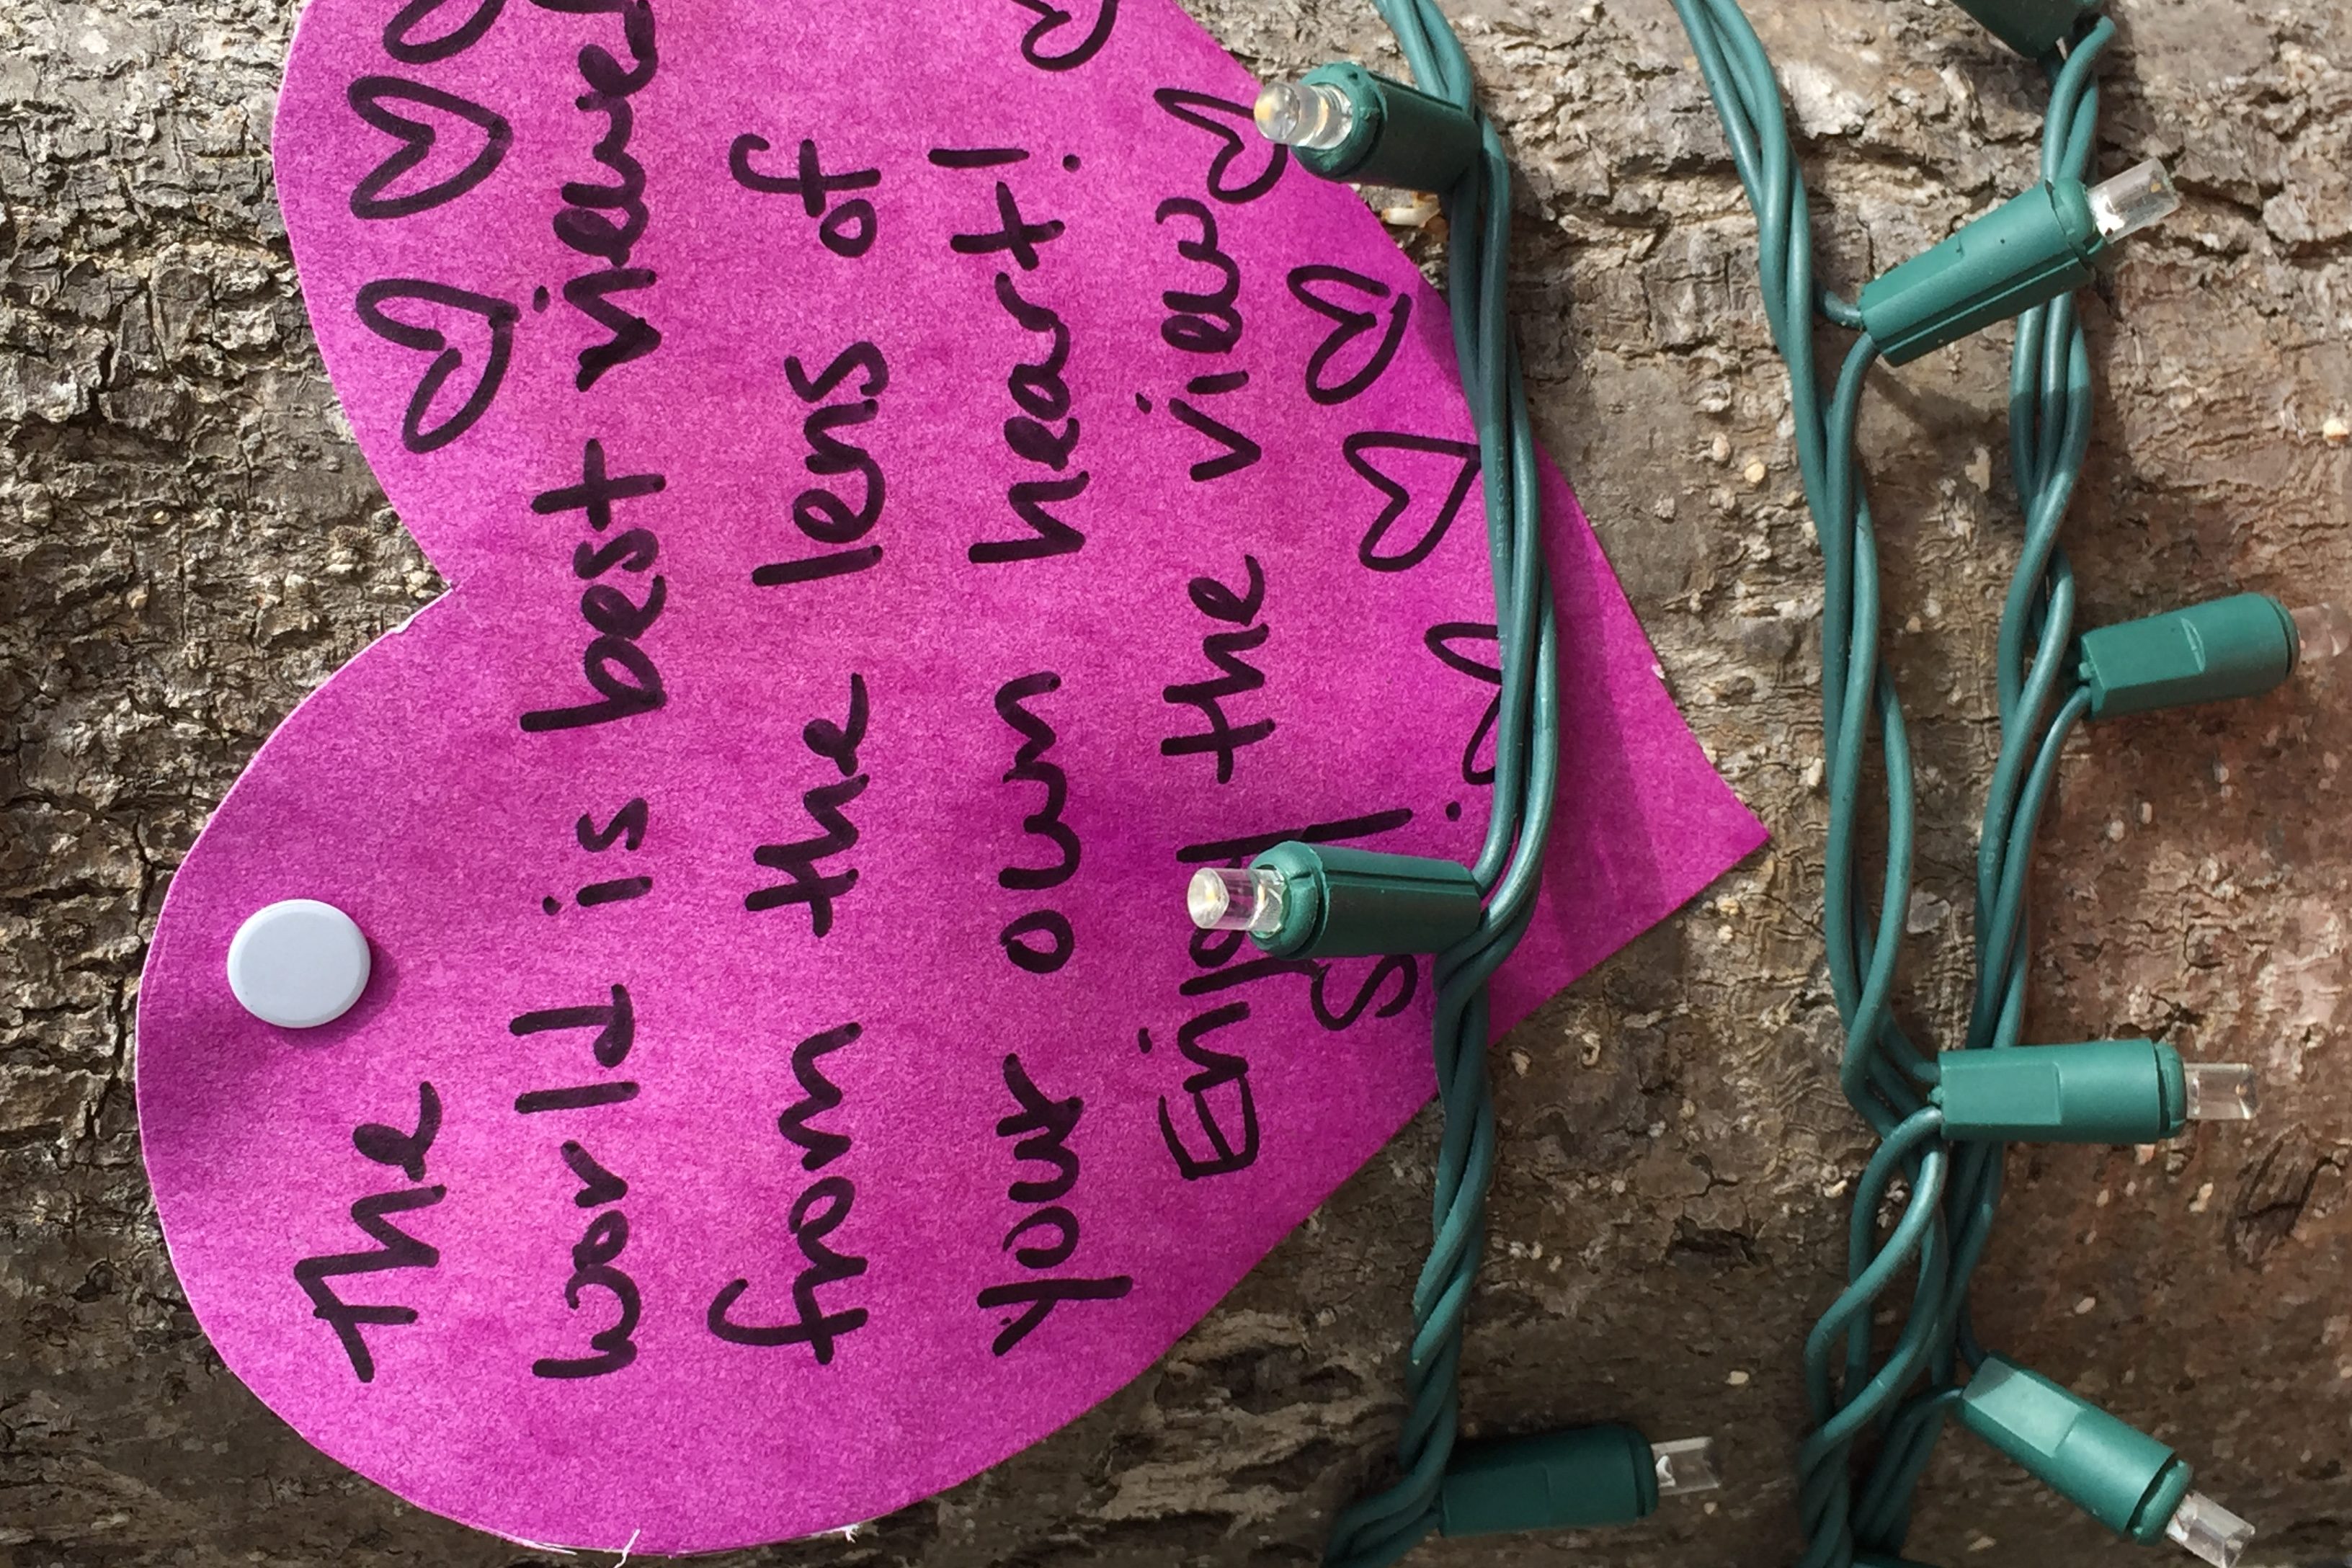 Paper heart tacked to tree, with motto